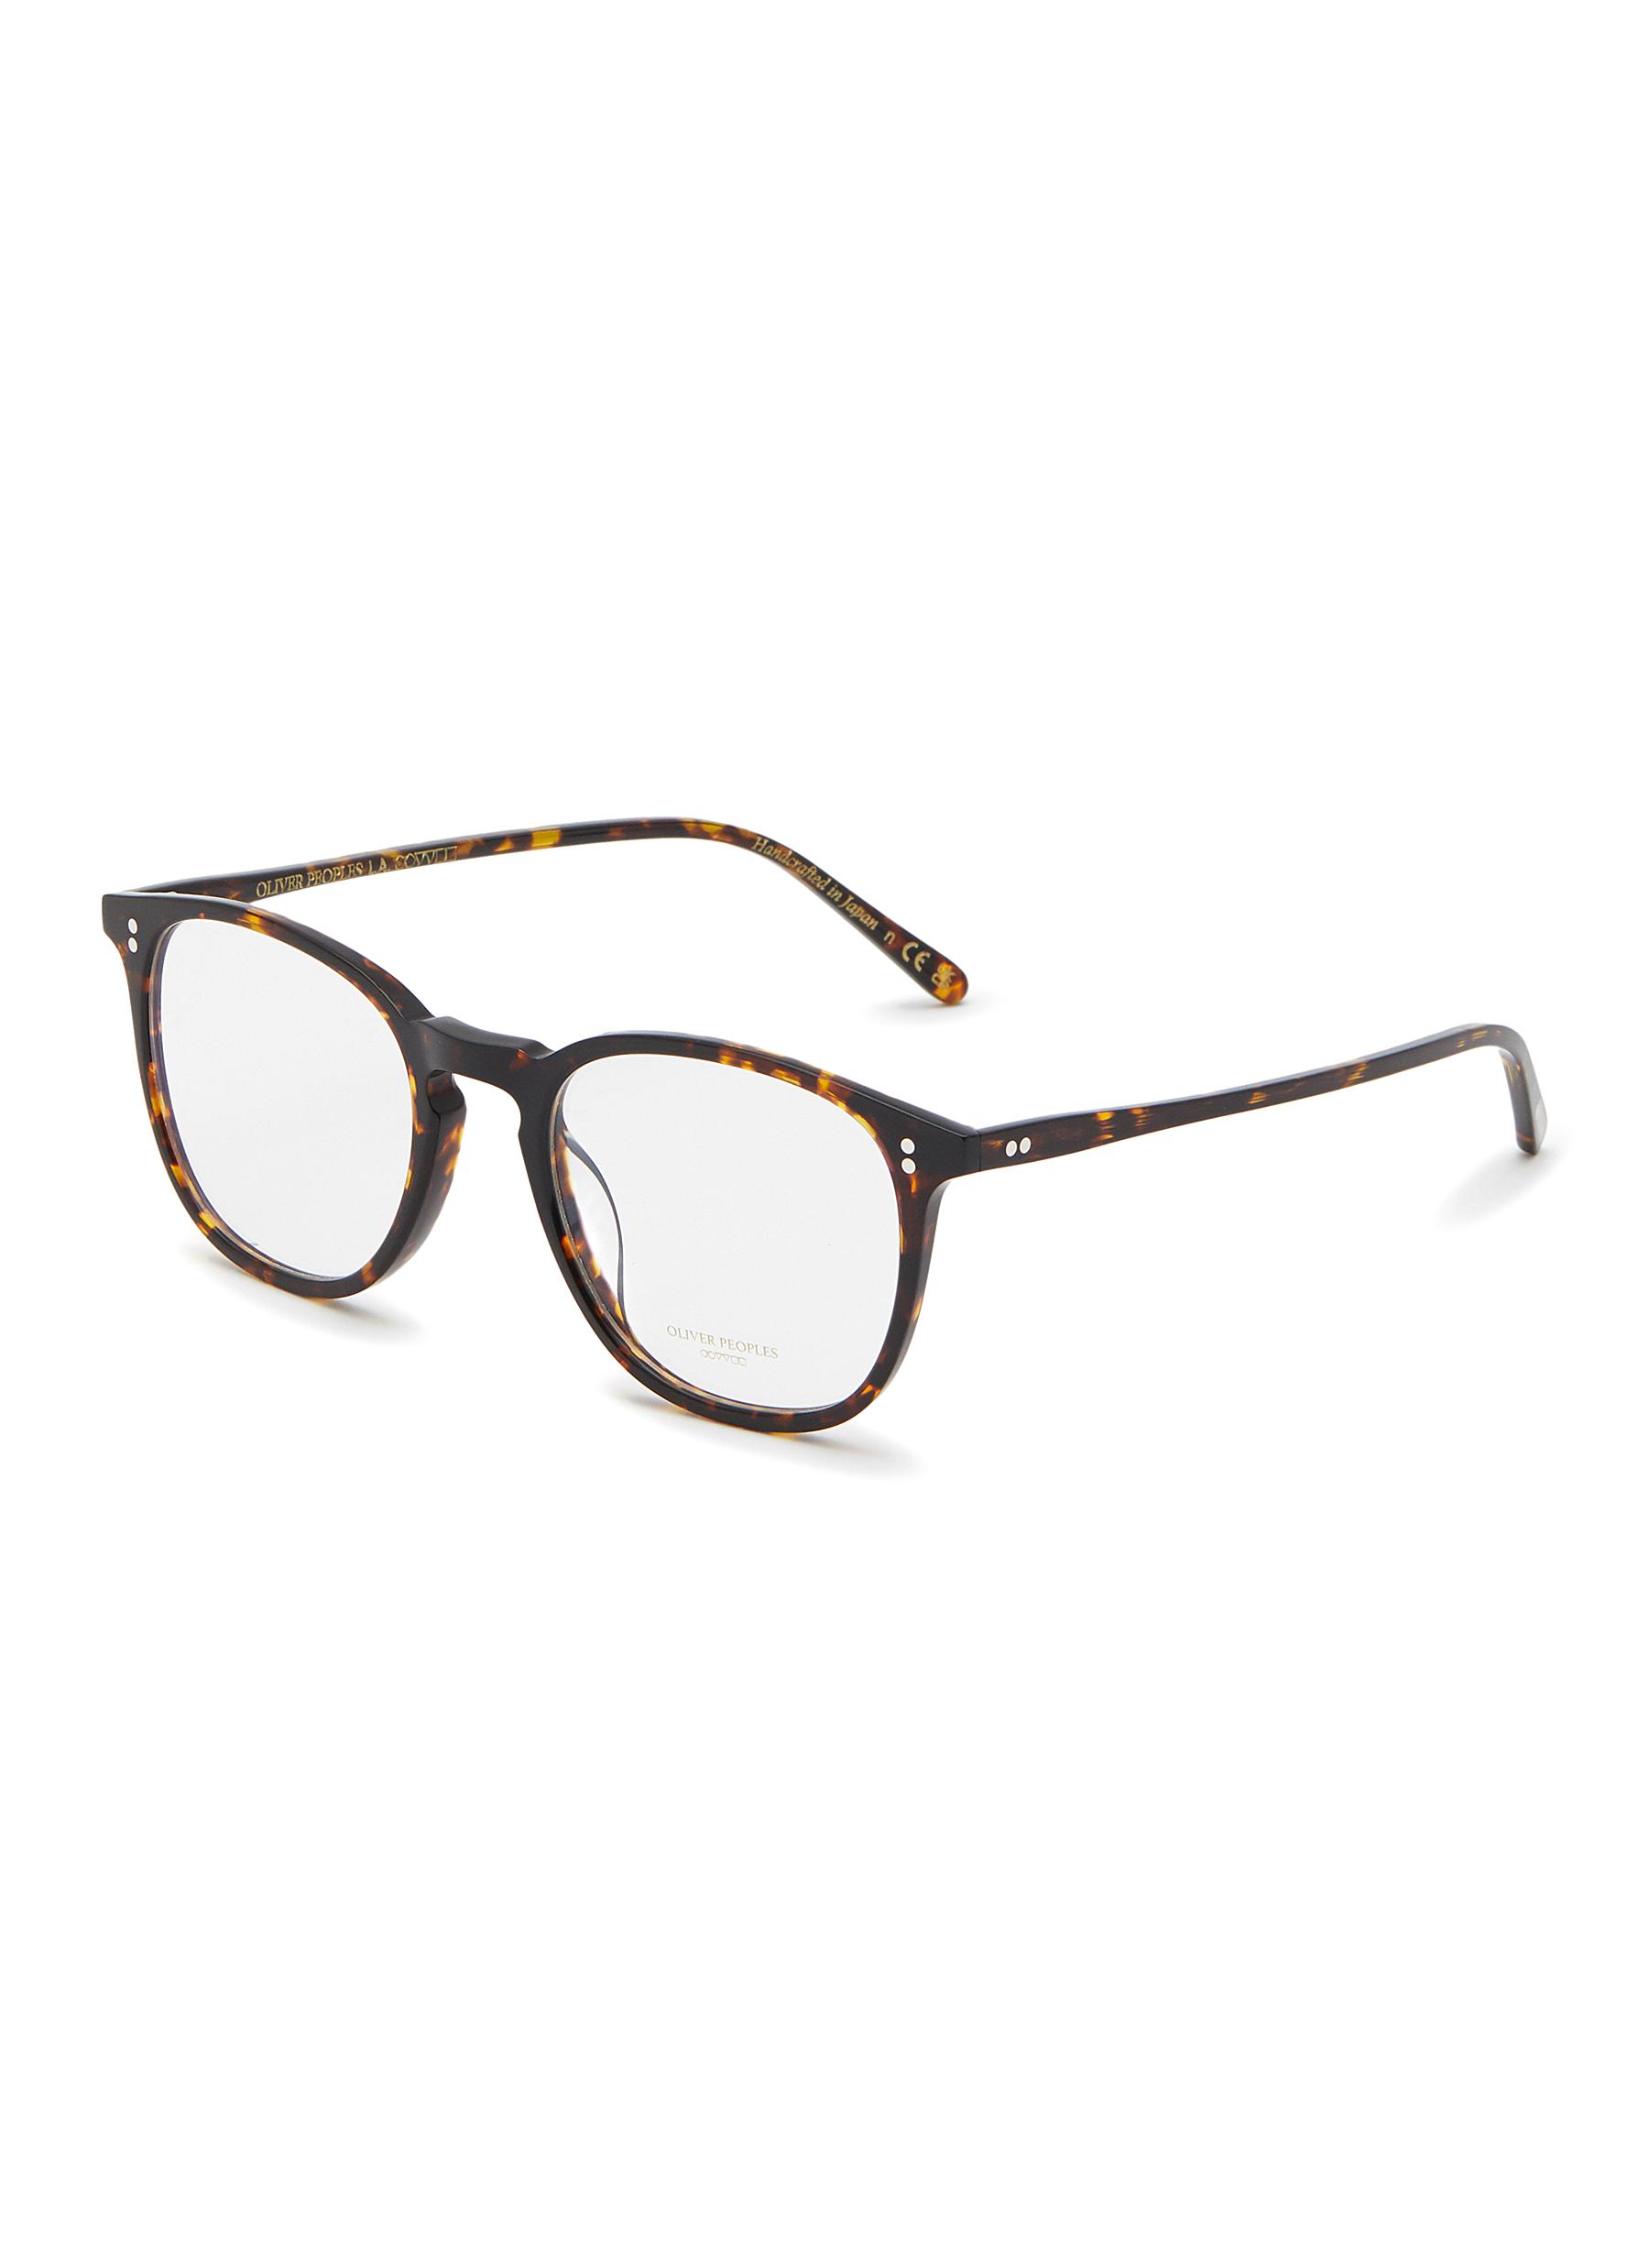 OLIVER PEOPLES ACCESSORIES Tortoiseshell Effect Acetate Round Optical Glasses